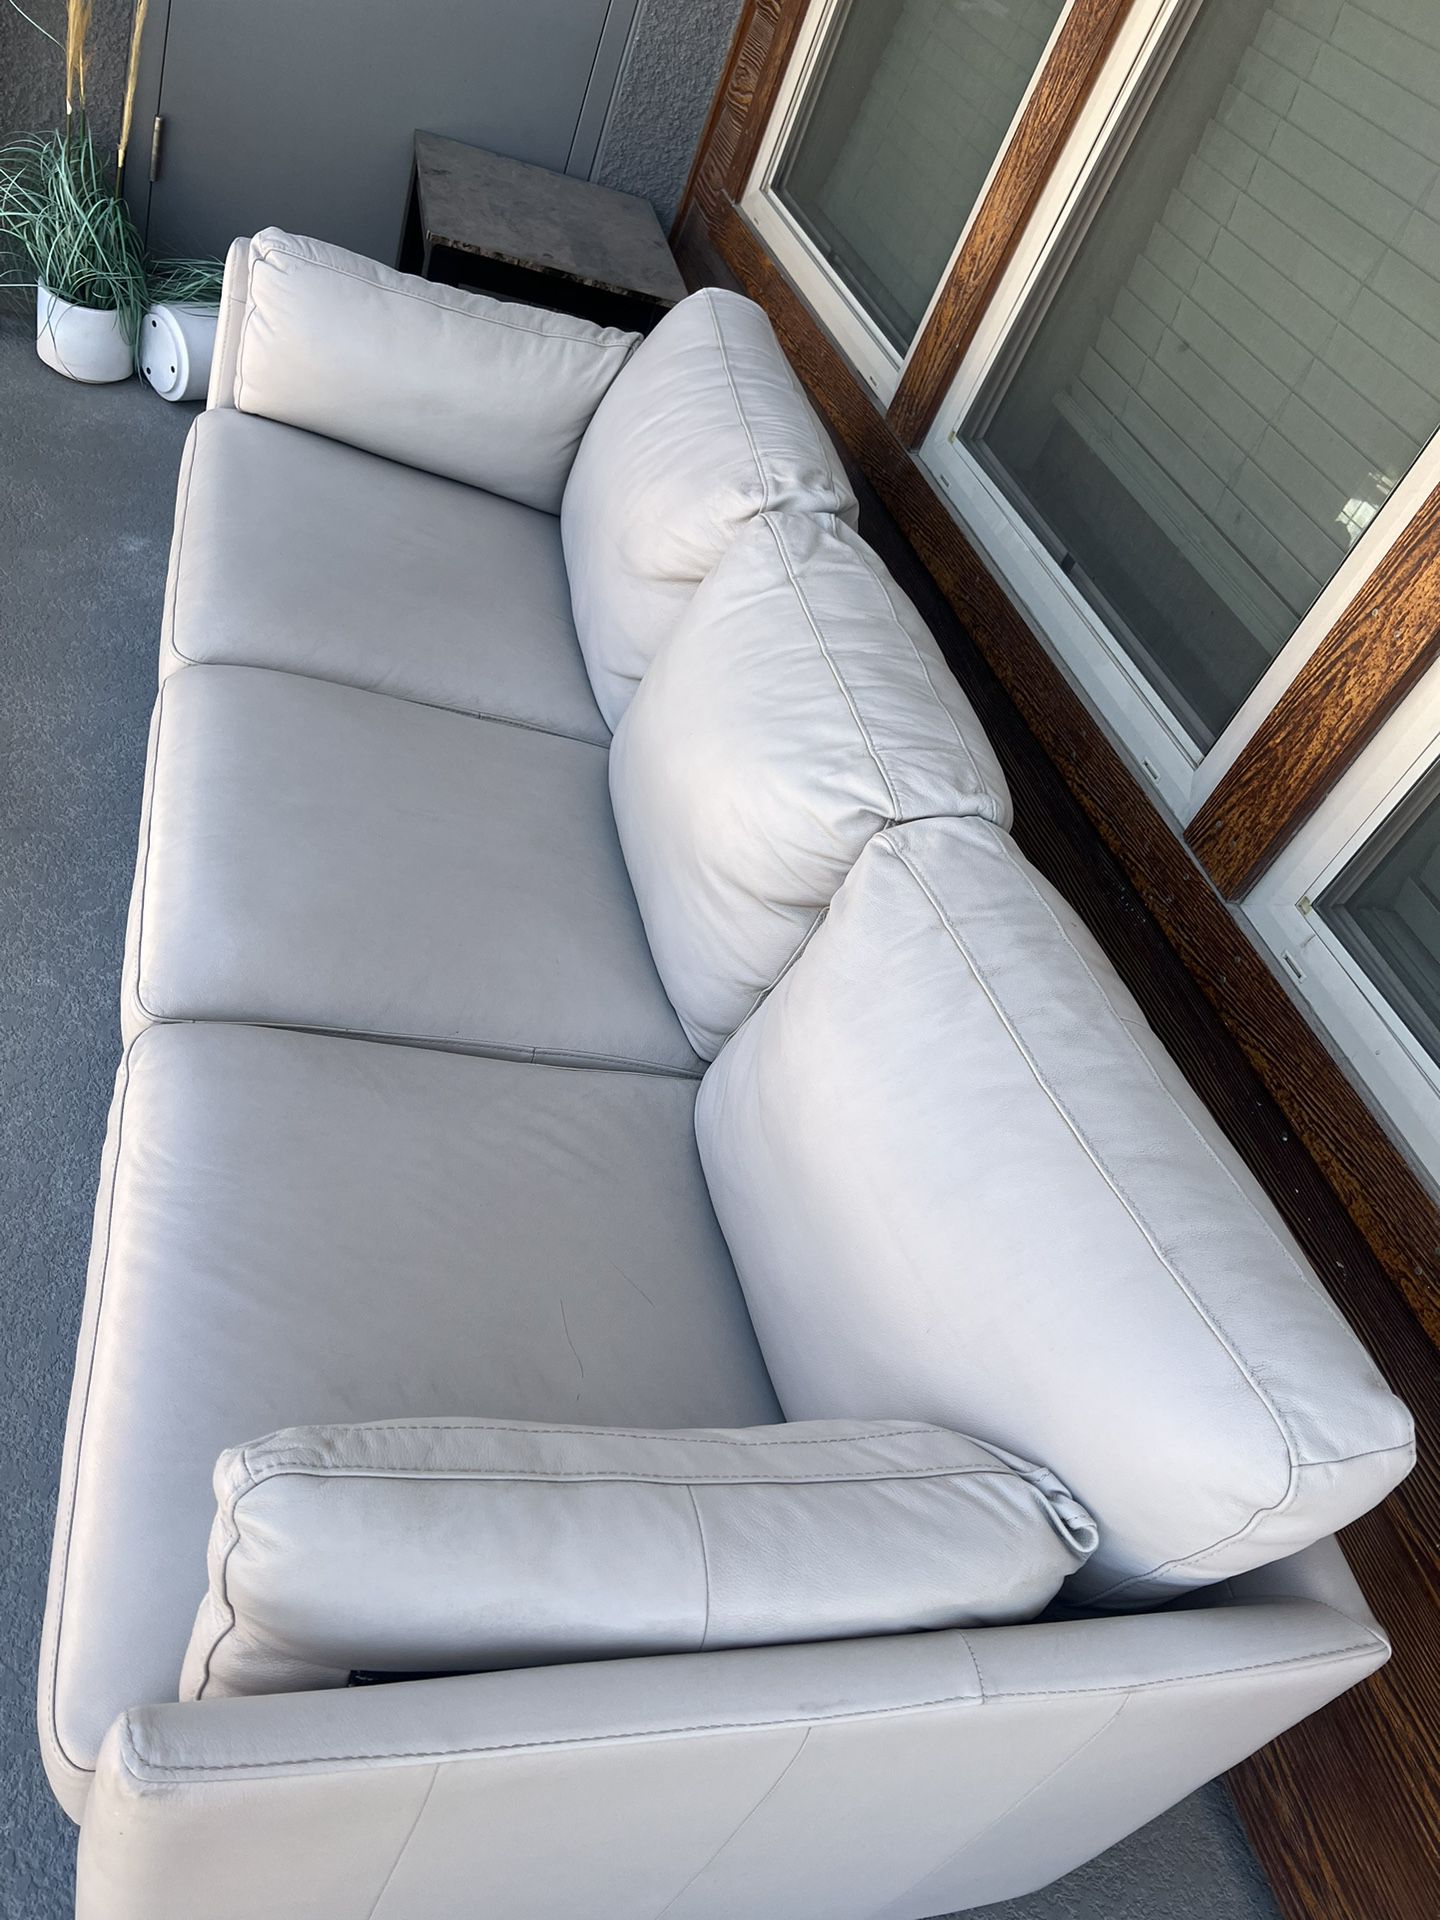 3 Sectional Couch For Sale 